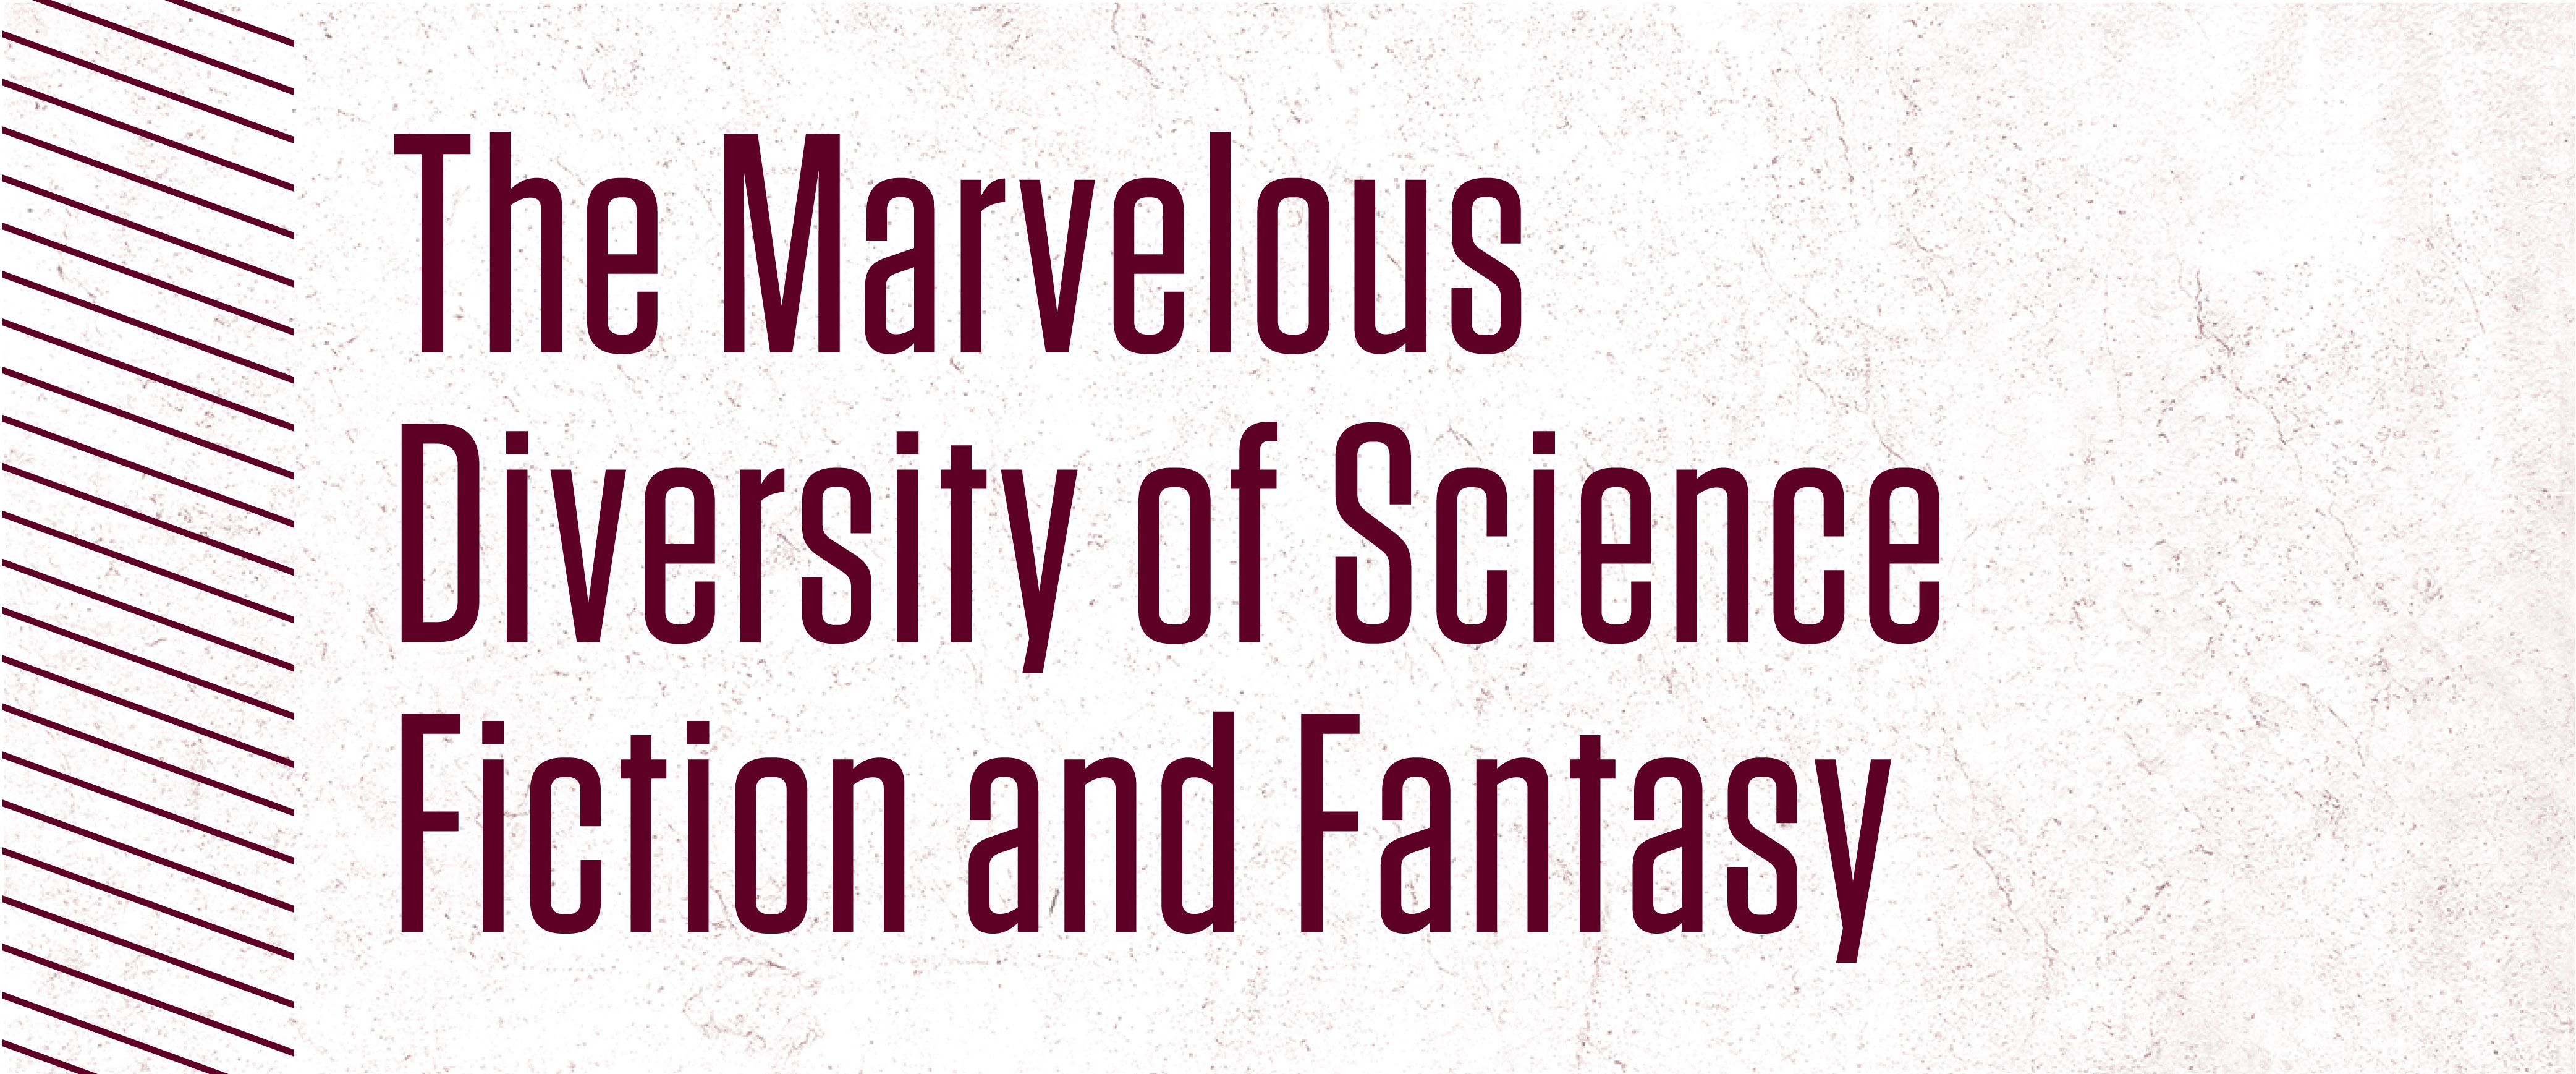 The Marvelous Diversity of Science Fiction and Fantasy